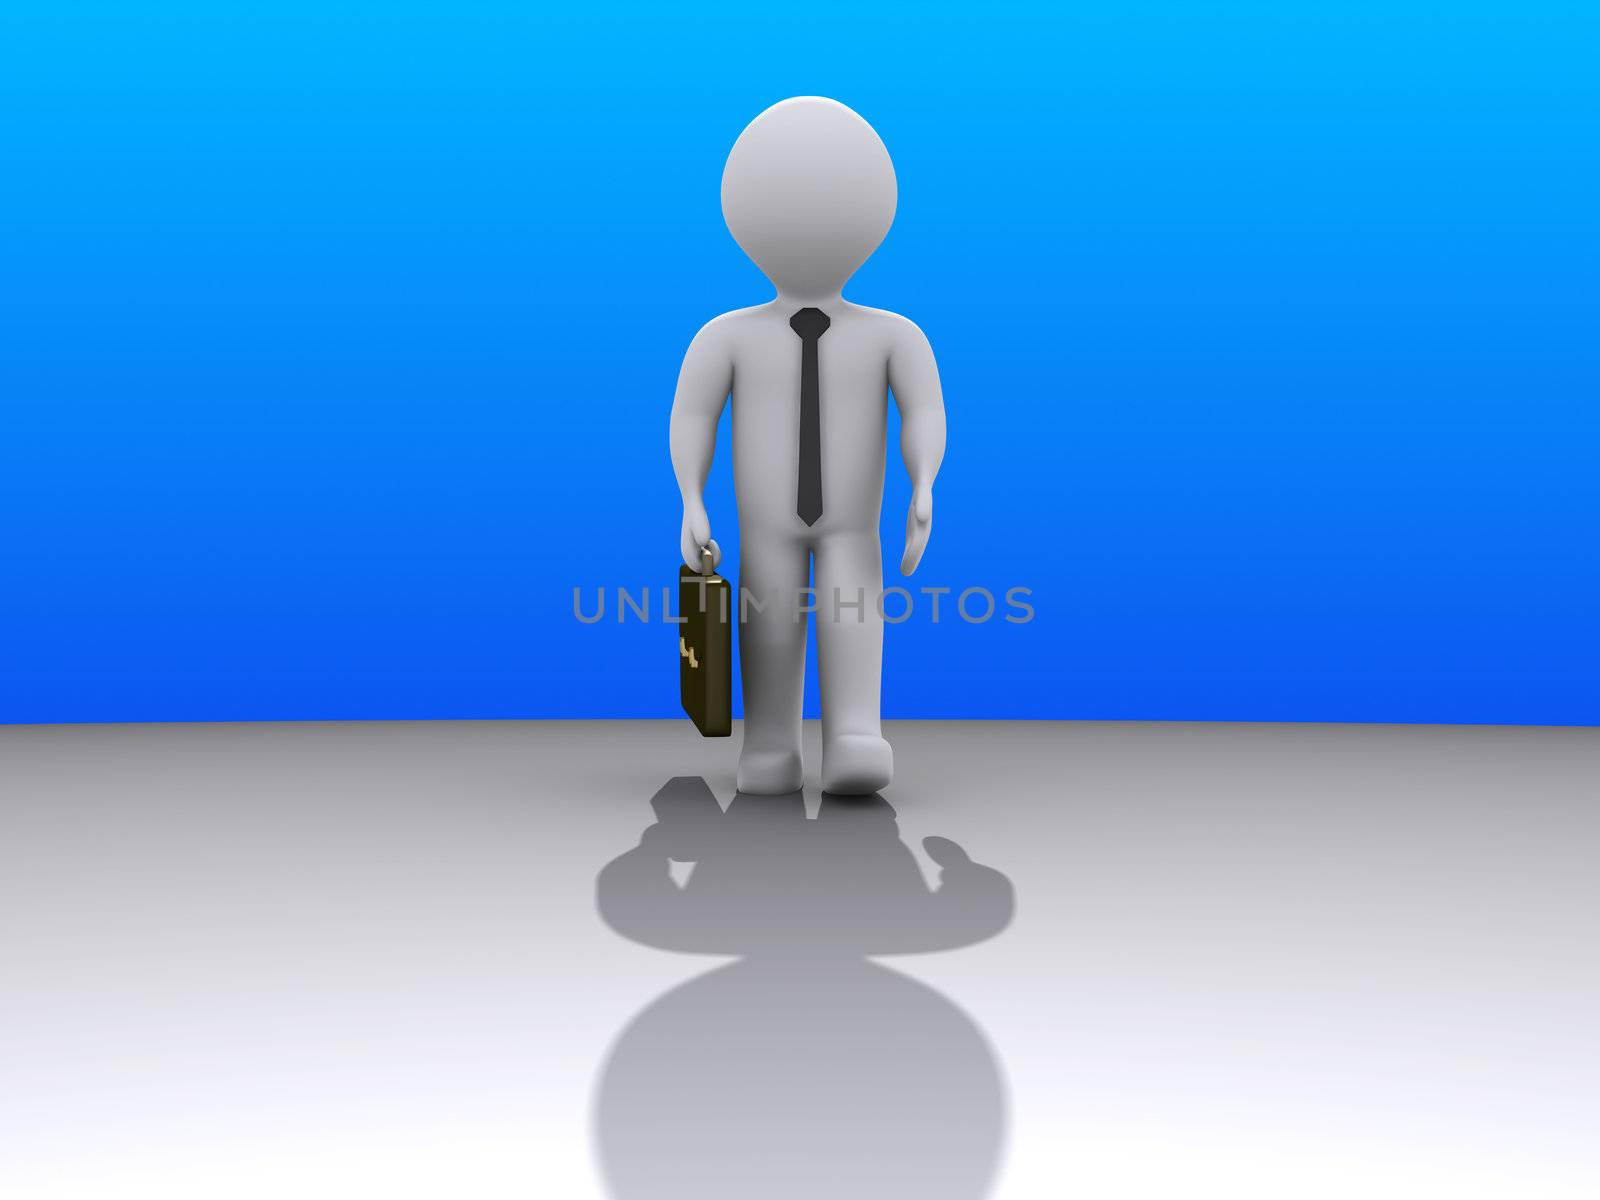 3d businessman with shadow is walking towards the camera